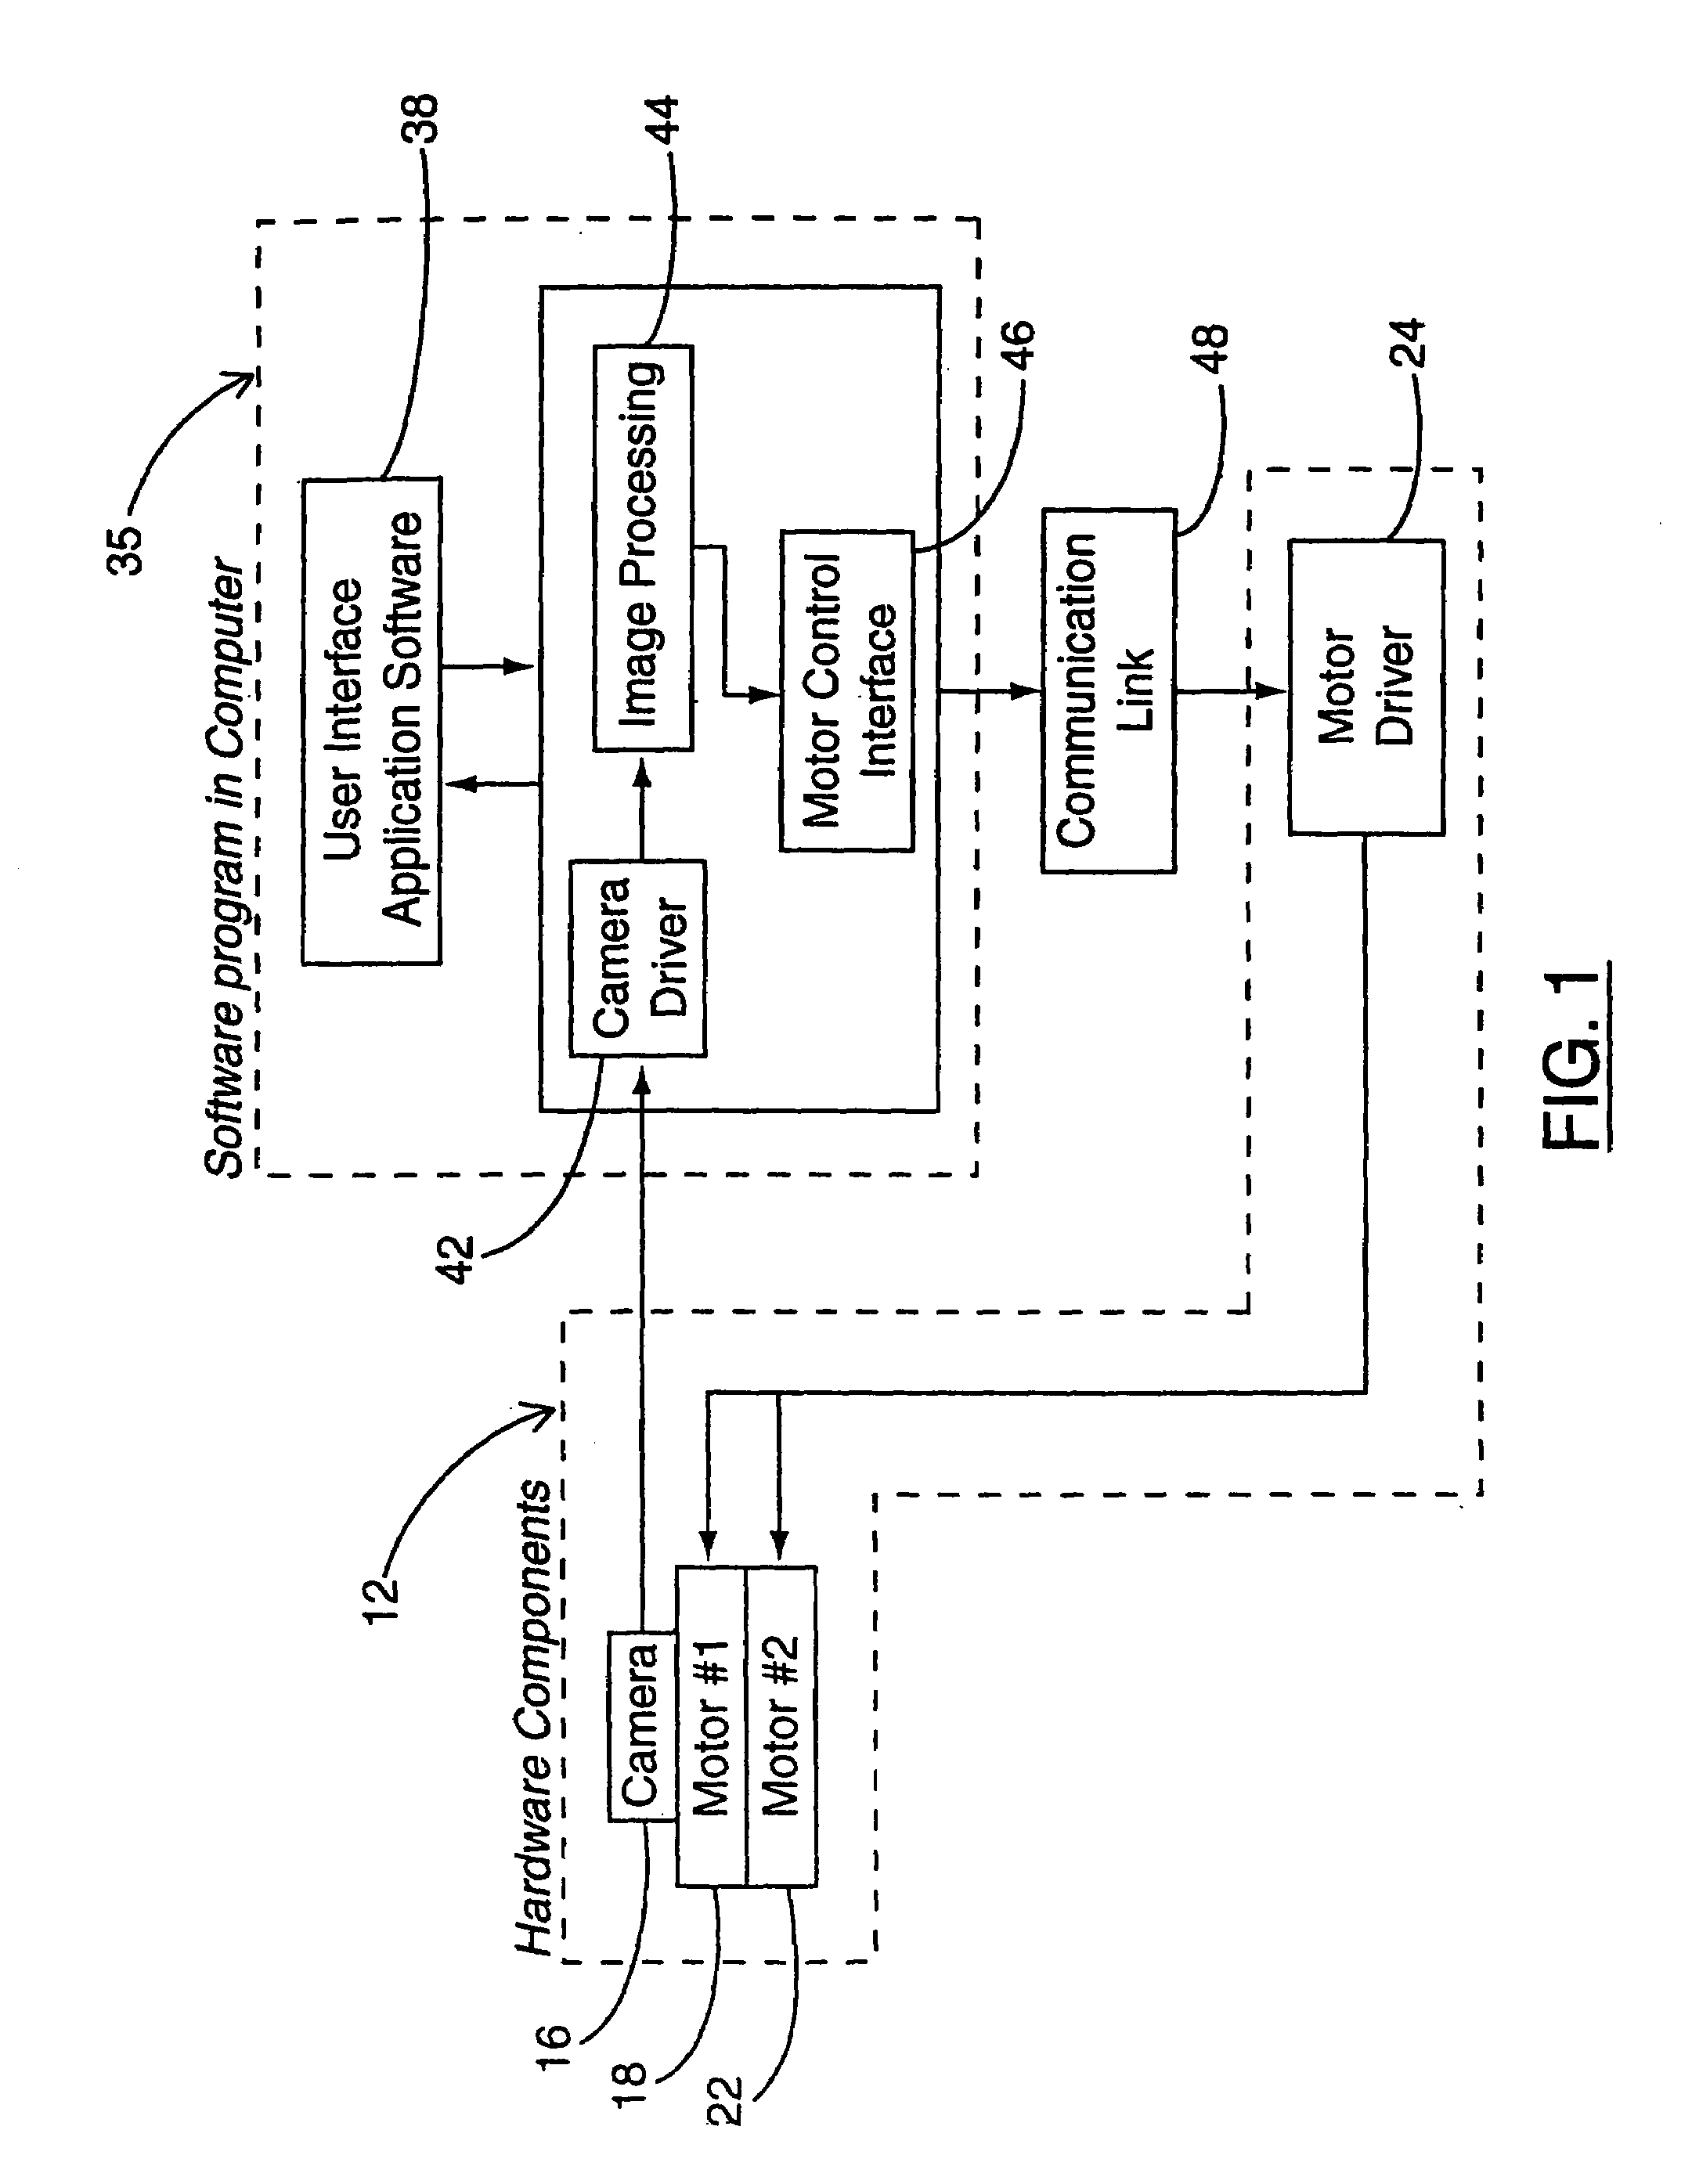 System and method for tracking a subject